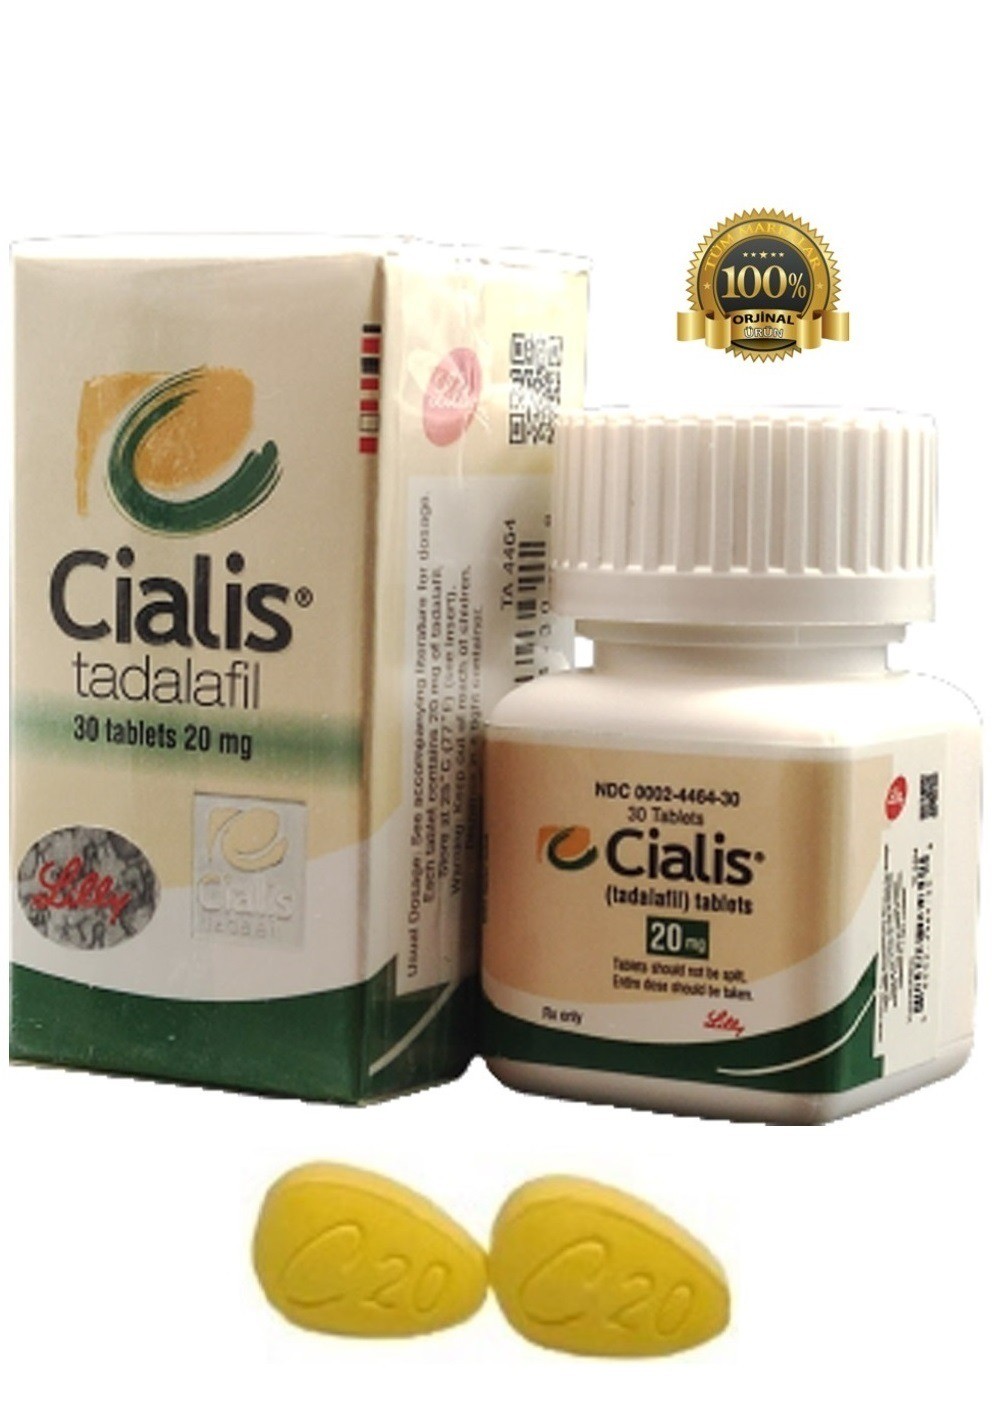 Cialis 20 mg 30 Tablet